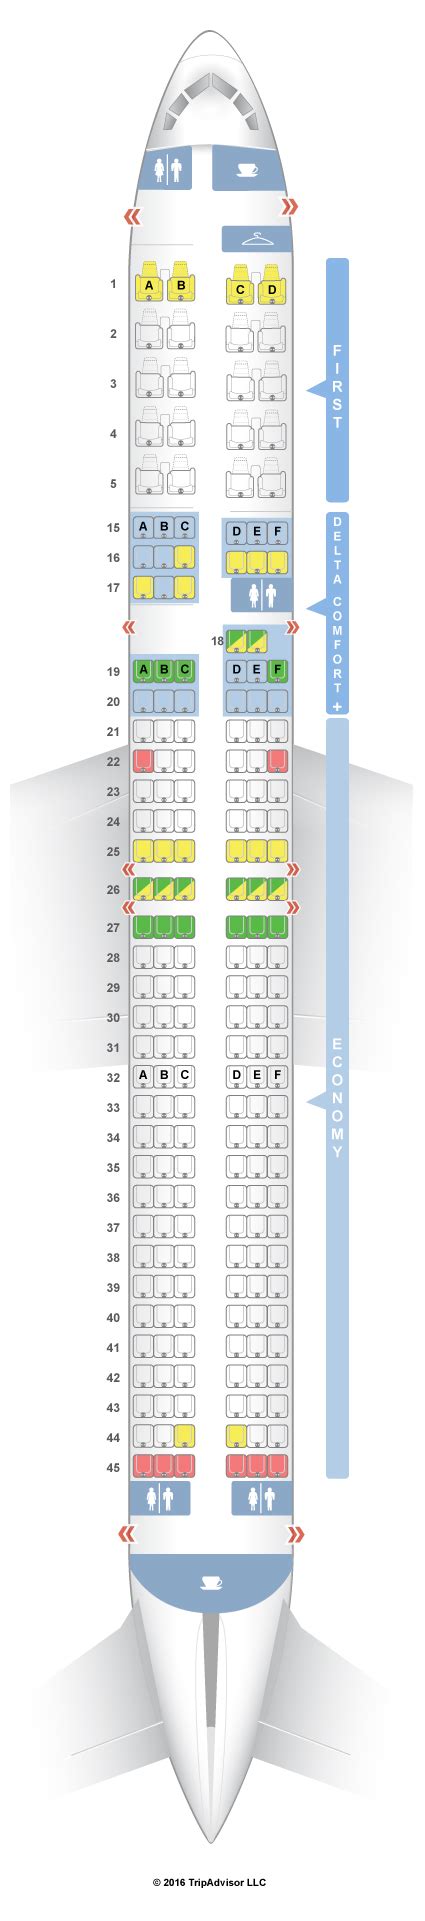 The seats 31ADC and 32DEF in the United 757-300 seat map may be unsuitable due to how close they are to the restrooms and the lack of reclining. The exit row before the 33rd row provides more freedom for stretching. But other travelers gather there to use the restrooms, making it inconvenient. 33A and 33F of the United 757-300 may require those ...